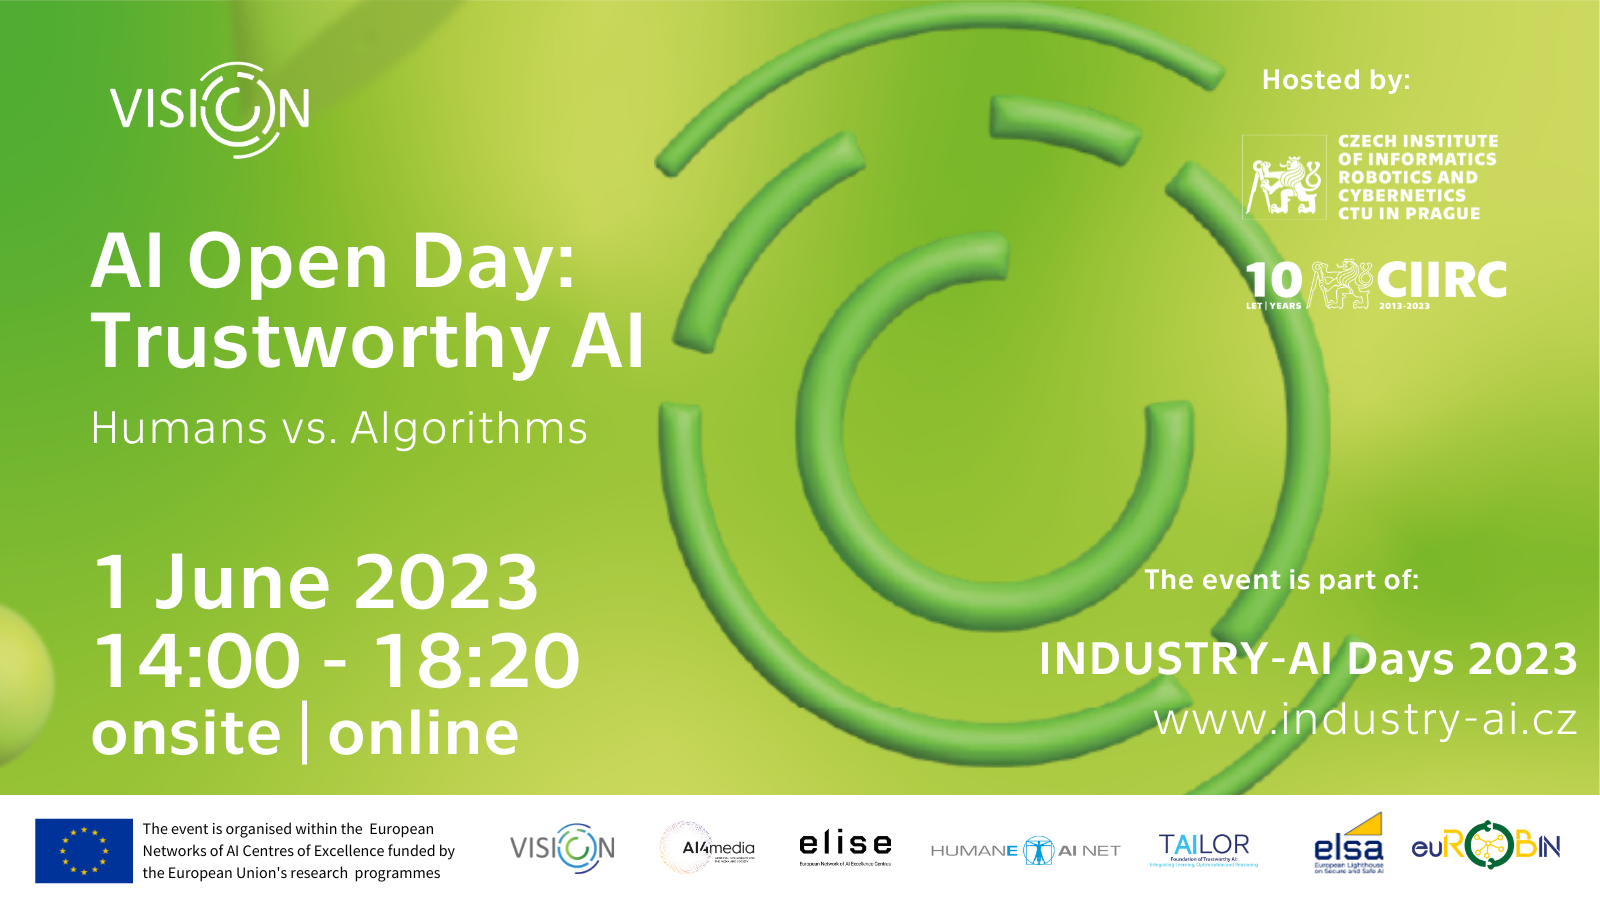 green background with green partial circles as a logo. Main text: AI open day: trustworthy AI